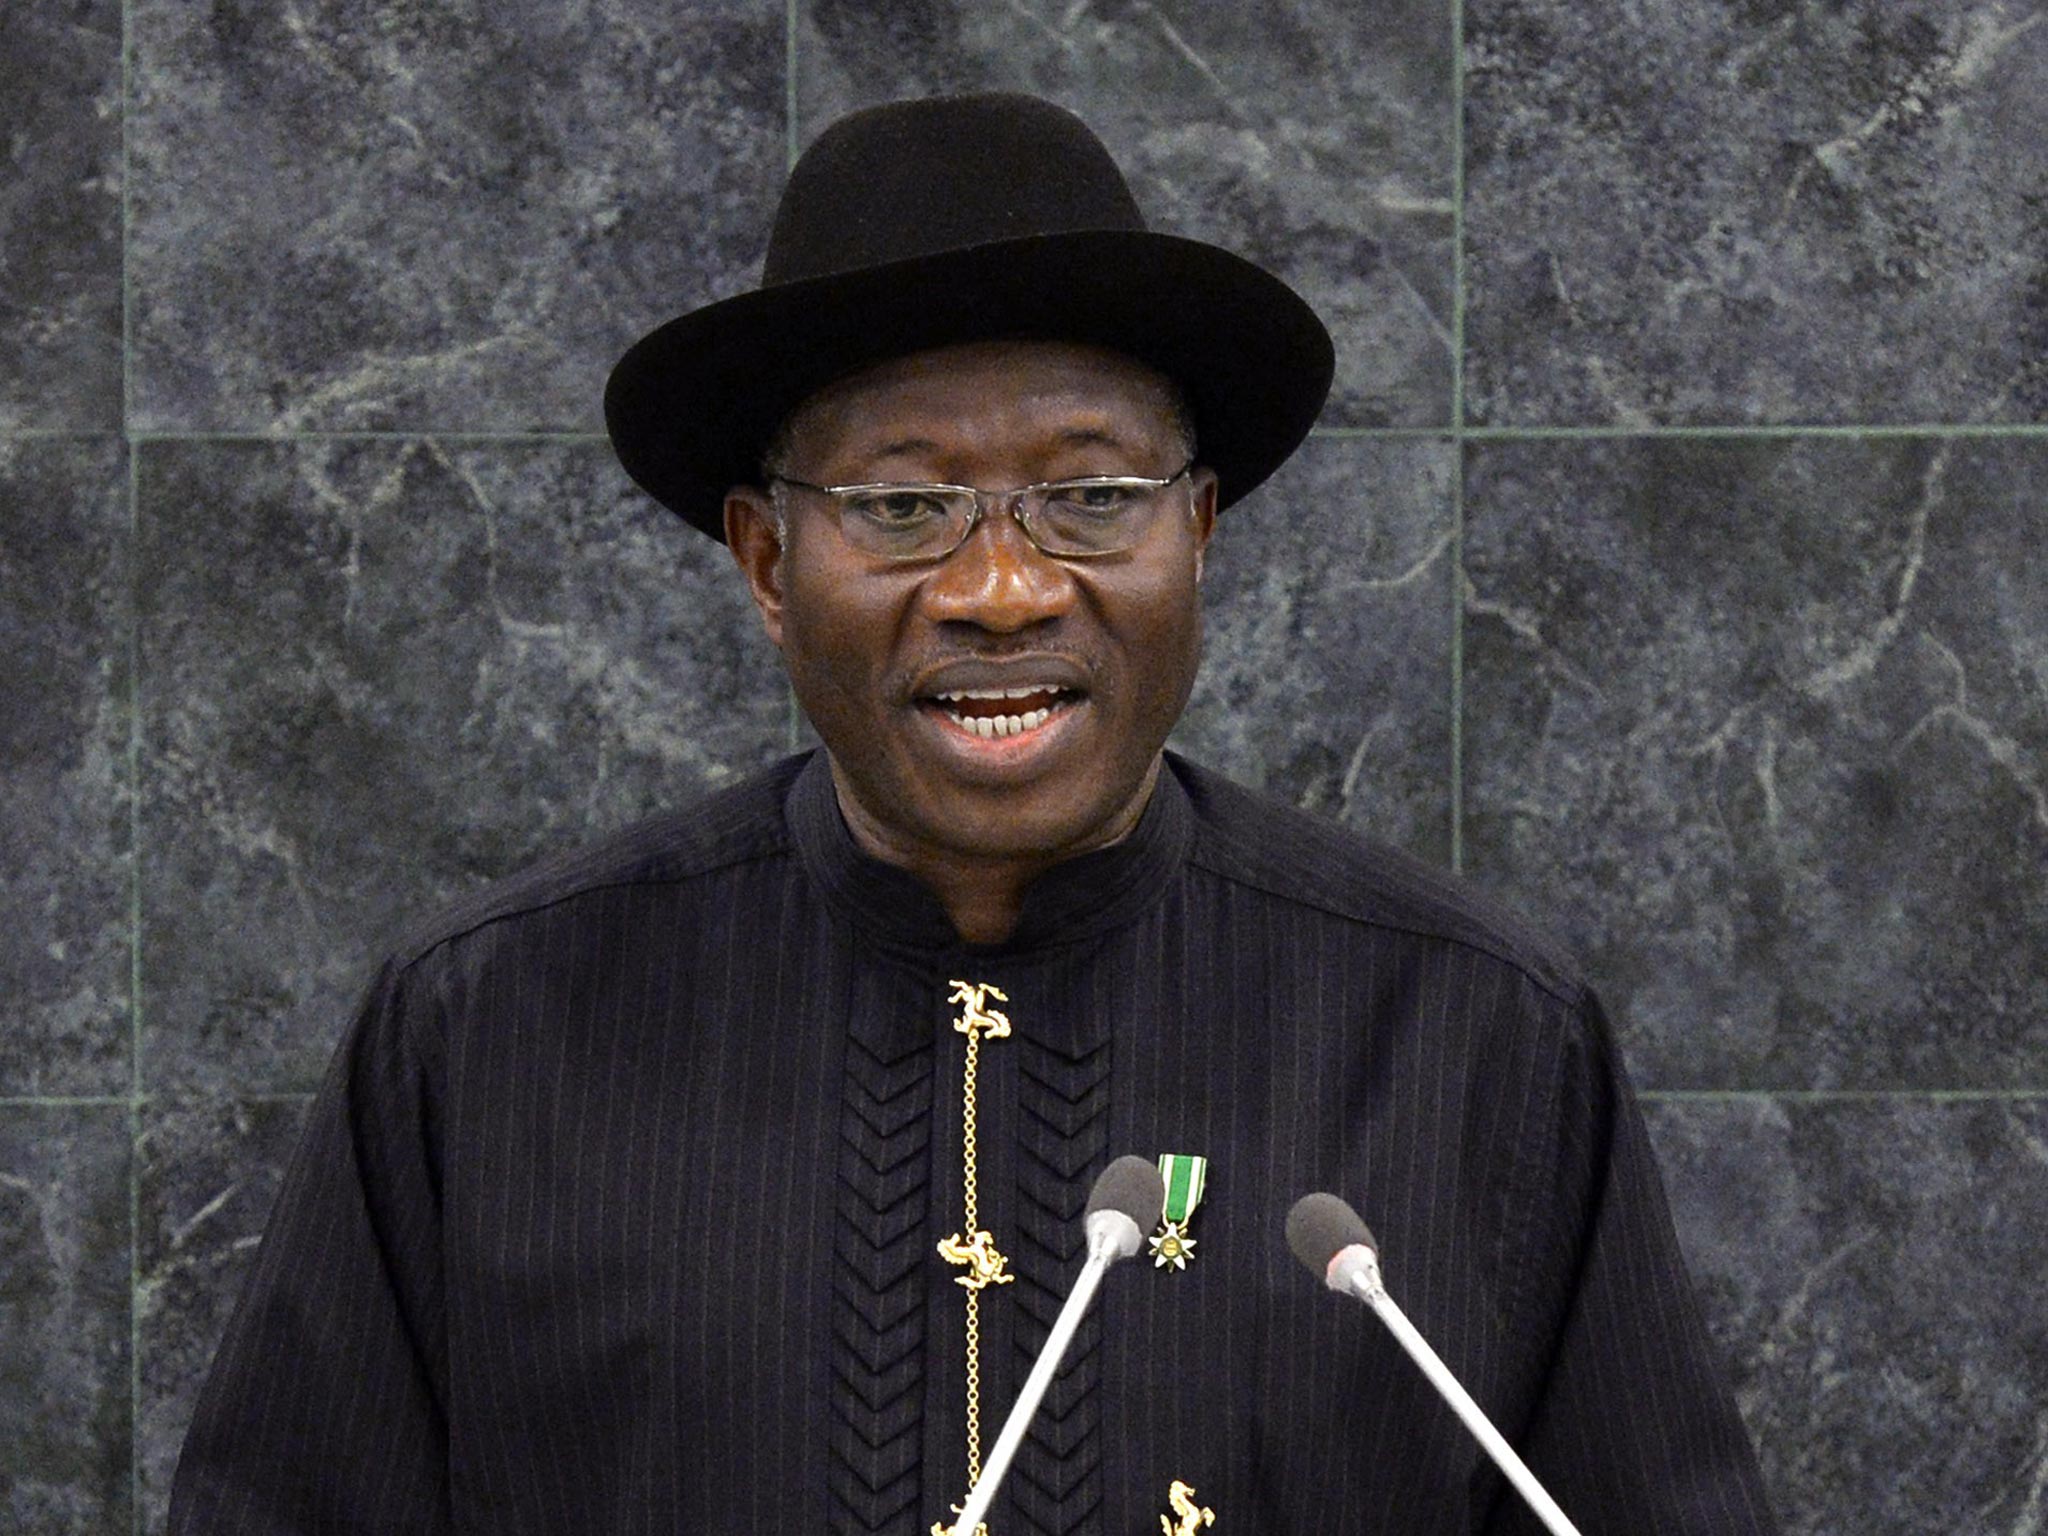 Nigerian President Goodluck Jonathan has ordered the inquiry into $20bn (£12bn) allegedly missing from petroleum sales